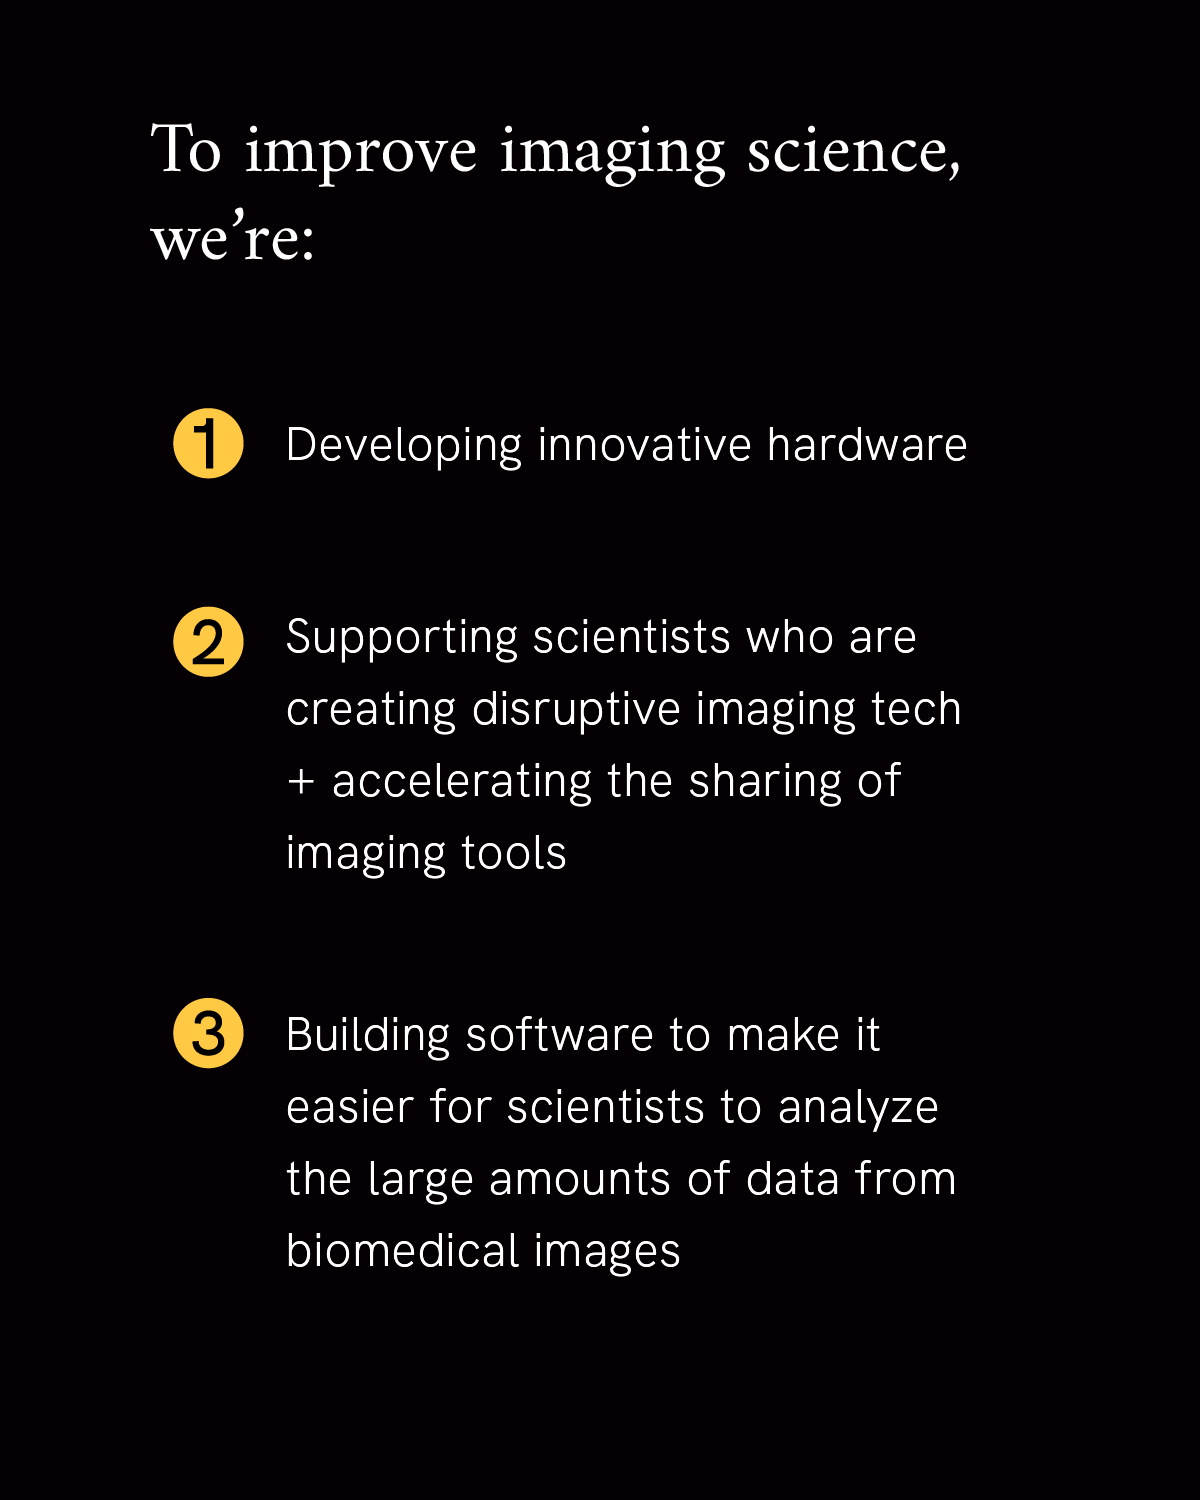 Infographic reads “To improve imaging science, we’re: 1. Developing innovative hardware 2. Supporting scientists who are creating disruptive imaging tech + accelerating the sharing of imaging tools 3. Building software to make it easier for scientists to analyze the large amounts of data from biomedical images,” on a black background.